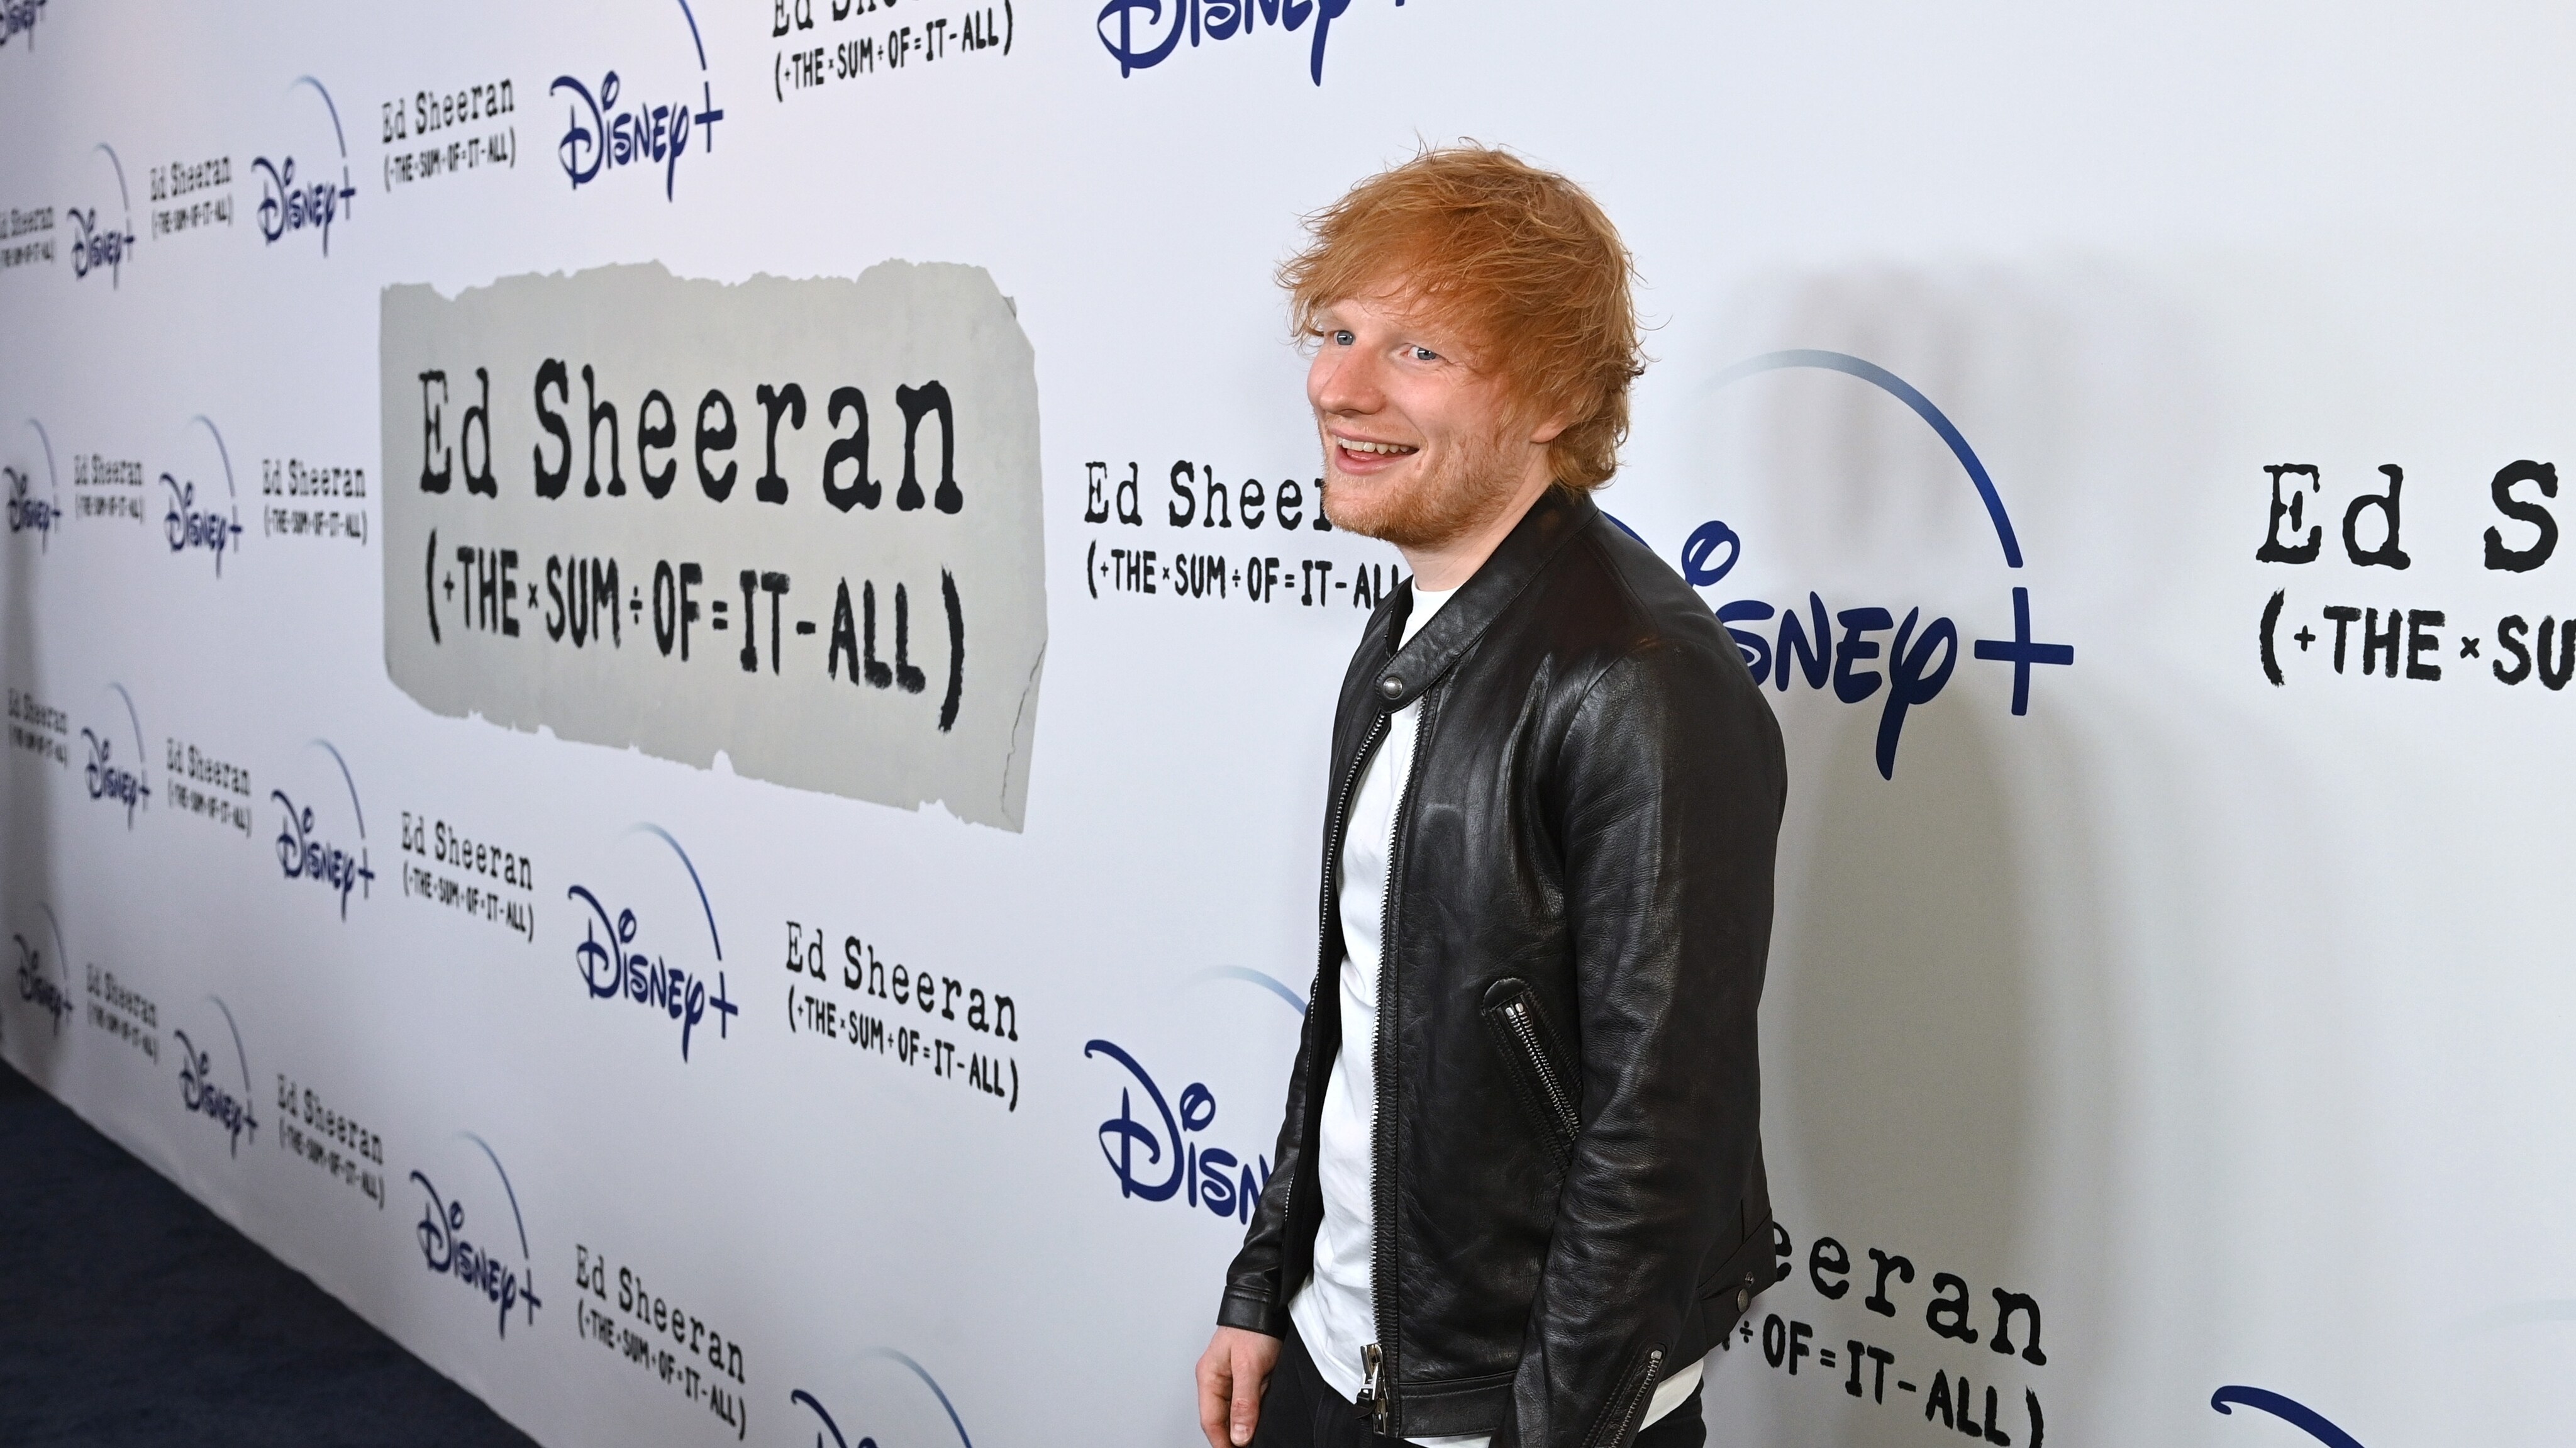 Global Superstar And Grammy® Award-Winning Artist Ed Sheeran Hits The Blue Carpet For The World Premiere Of The Disney+ Original Series ‘Ed Sheeran: The Sum Of It All’